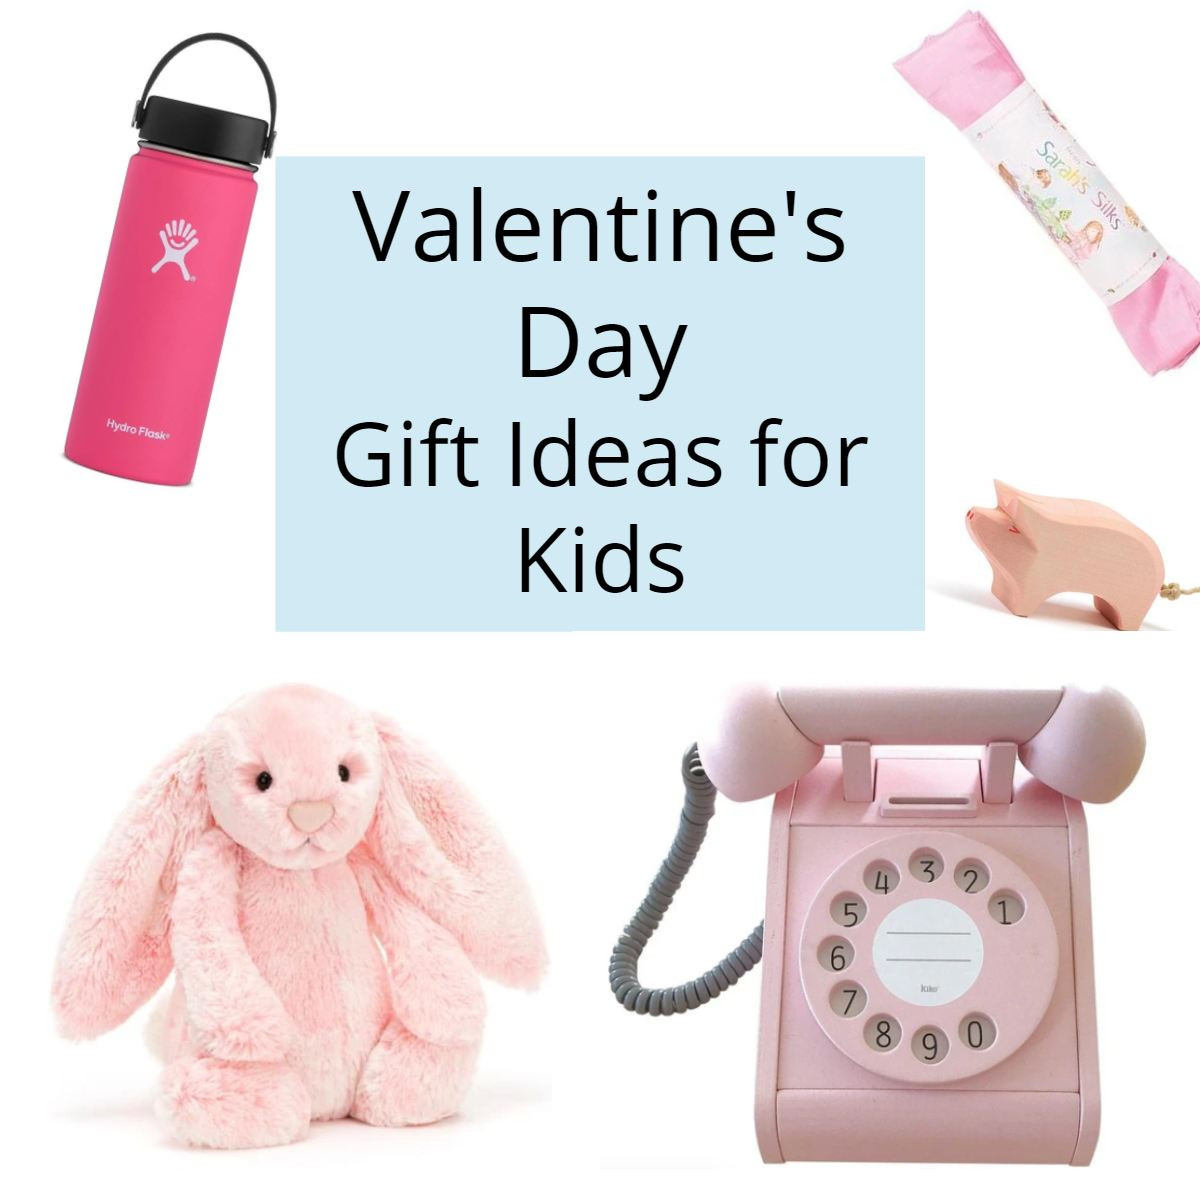 Gift Ideas For Kids For Valentines Day
 Valentine s Day Gift Ideas for Kids 2020 The Modern